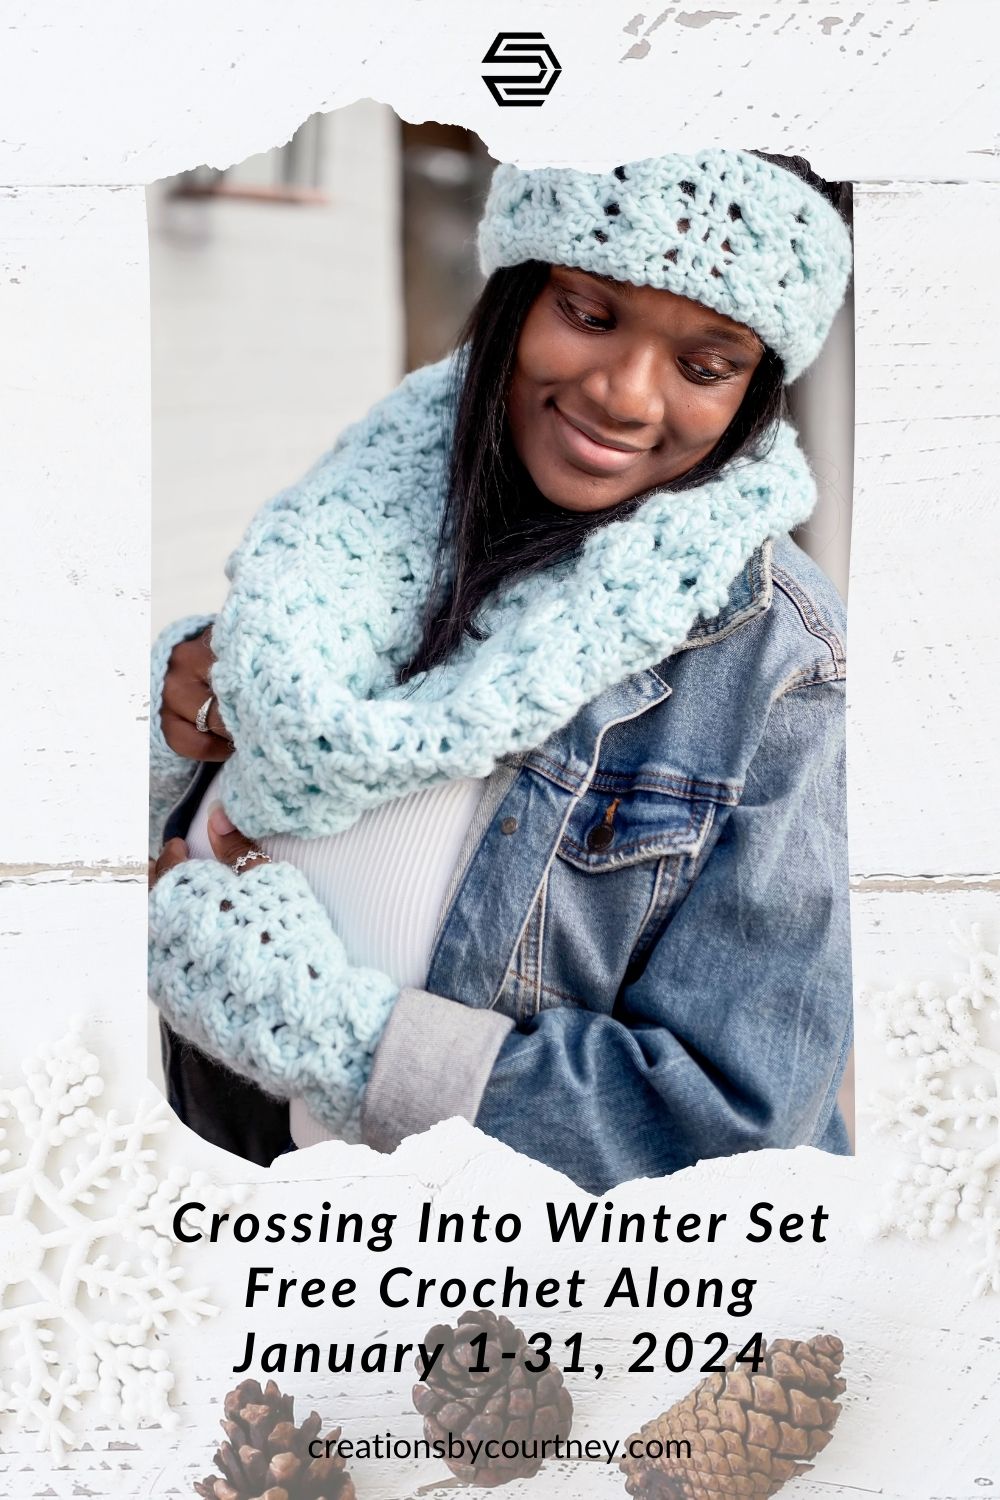 Join the free crochet along for the Crossing into Winter Set, which includes a crochet cowl, ear warmers and fingerless mitts for childcare, teens and adults.